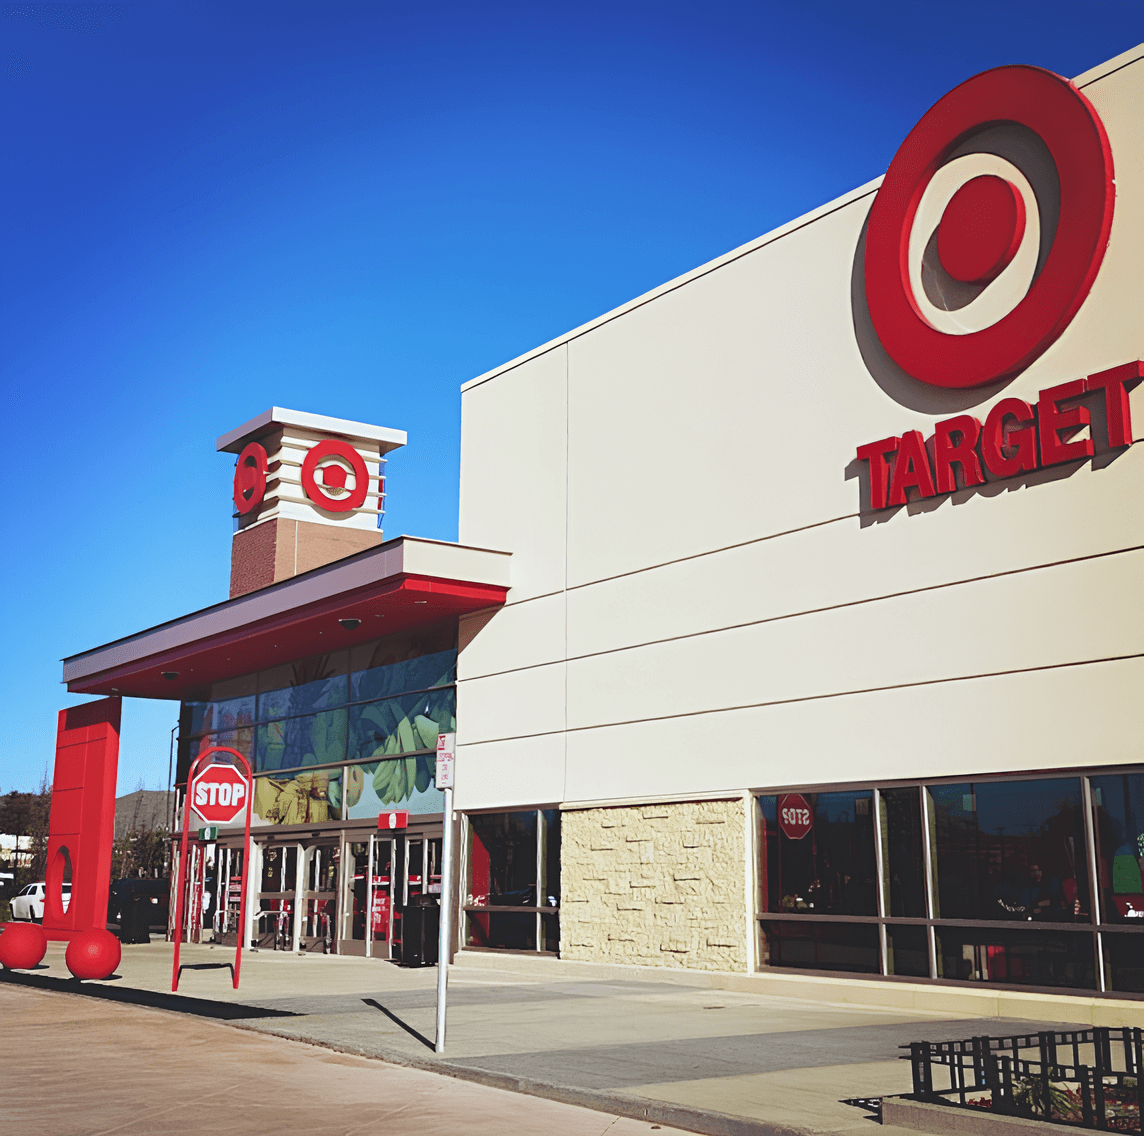 Exterior image of Target in Fremont, California, designed by architect Jeff Finsand.